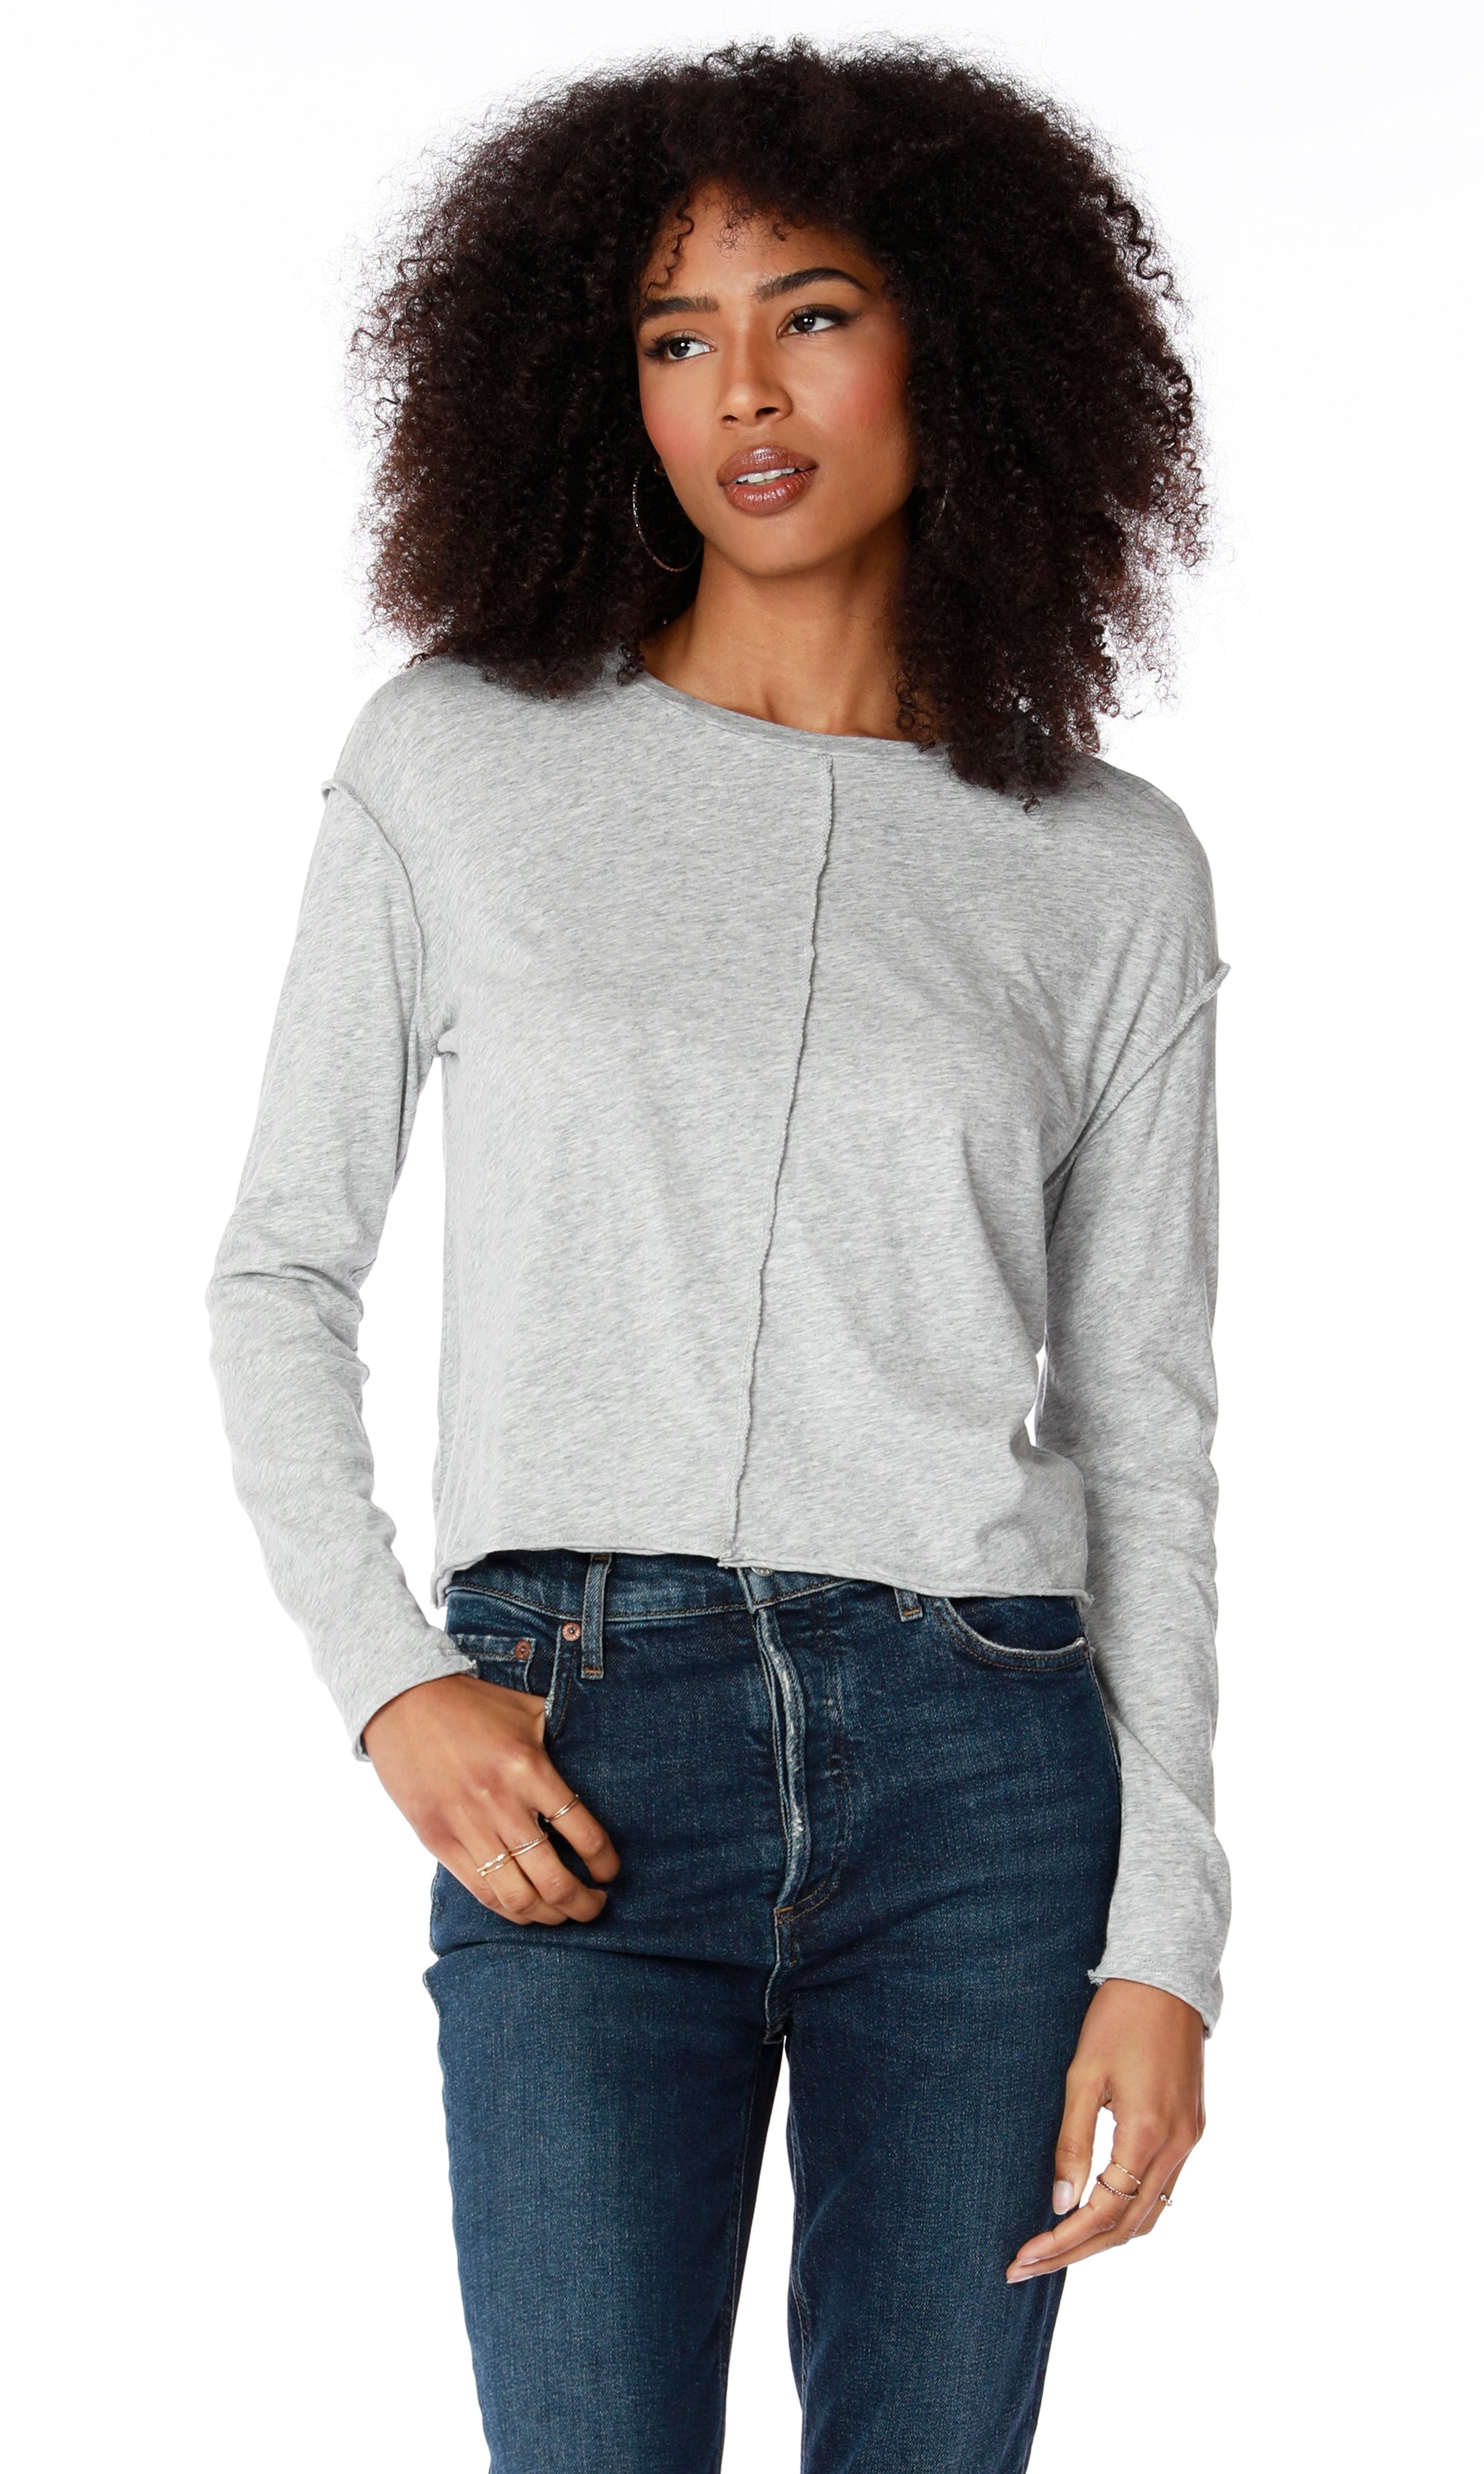 Heather grey long sleeve crewneck tee with exposed seam by Bobi at Tru Blue Boutique 